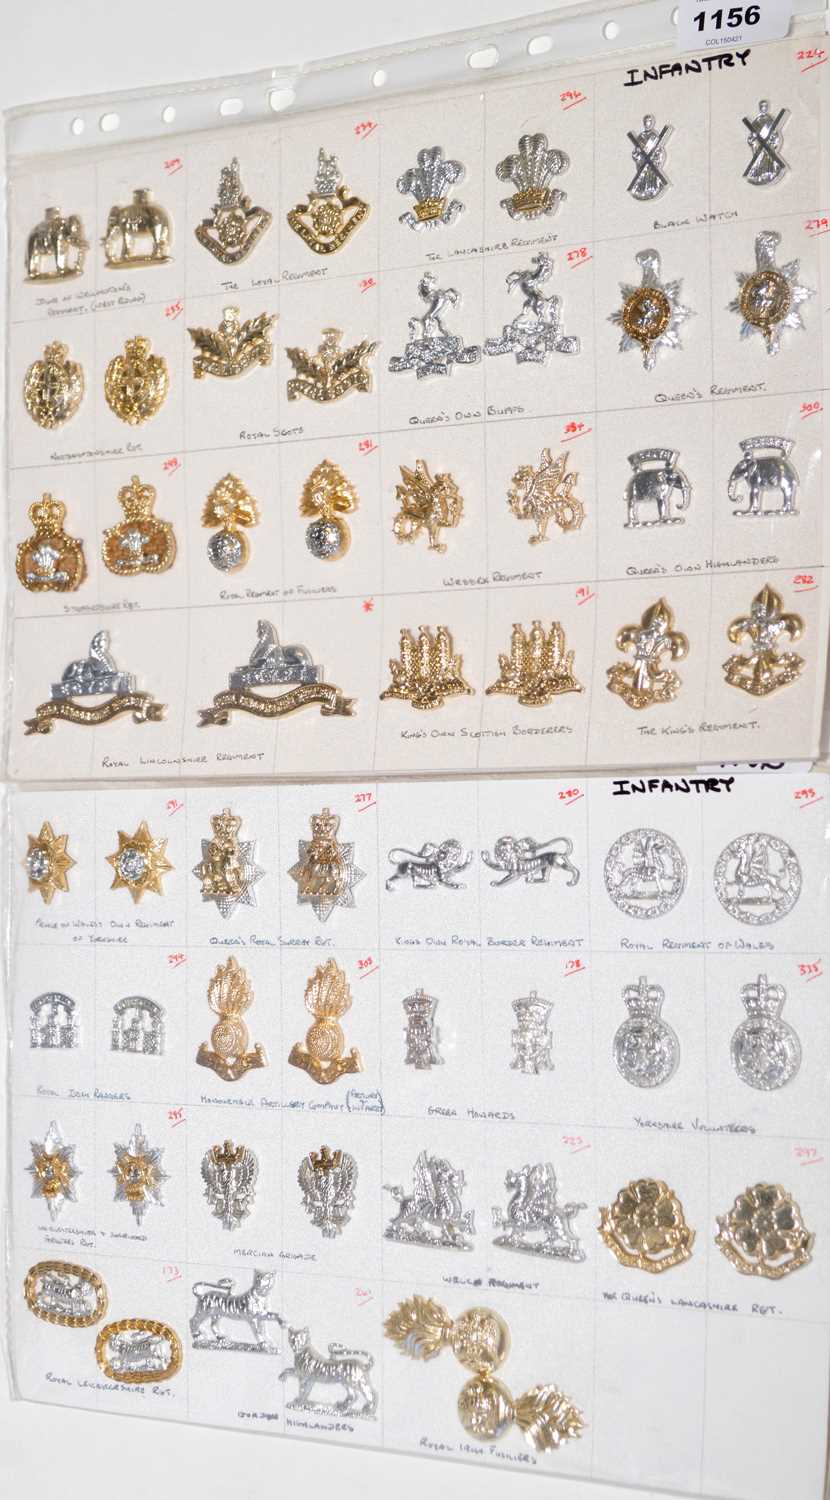 Lot 1156 - A collection of 30 pairs of Infantry collar badges.